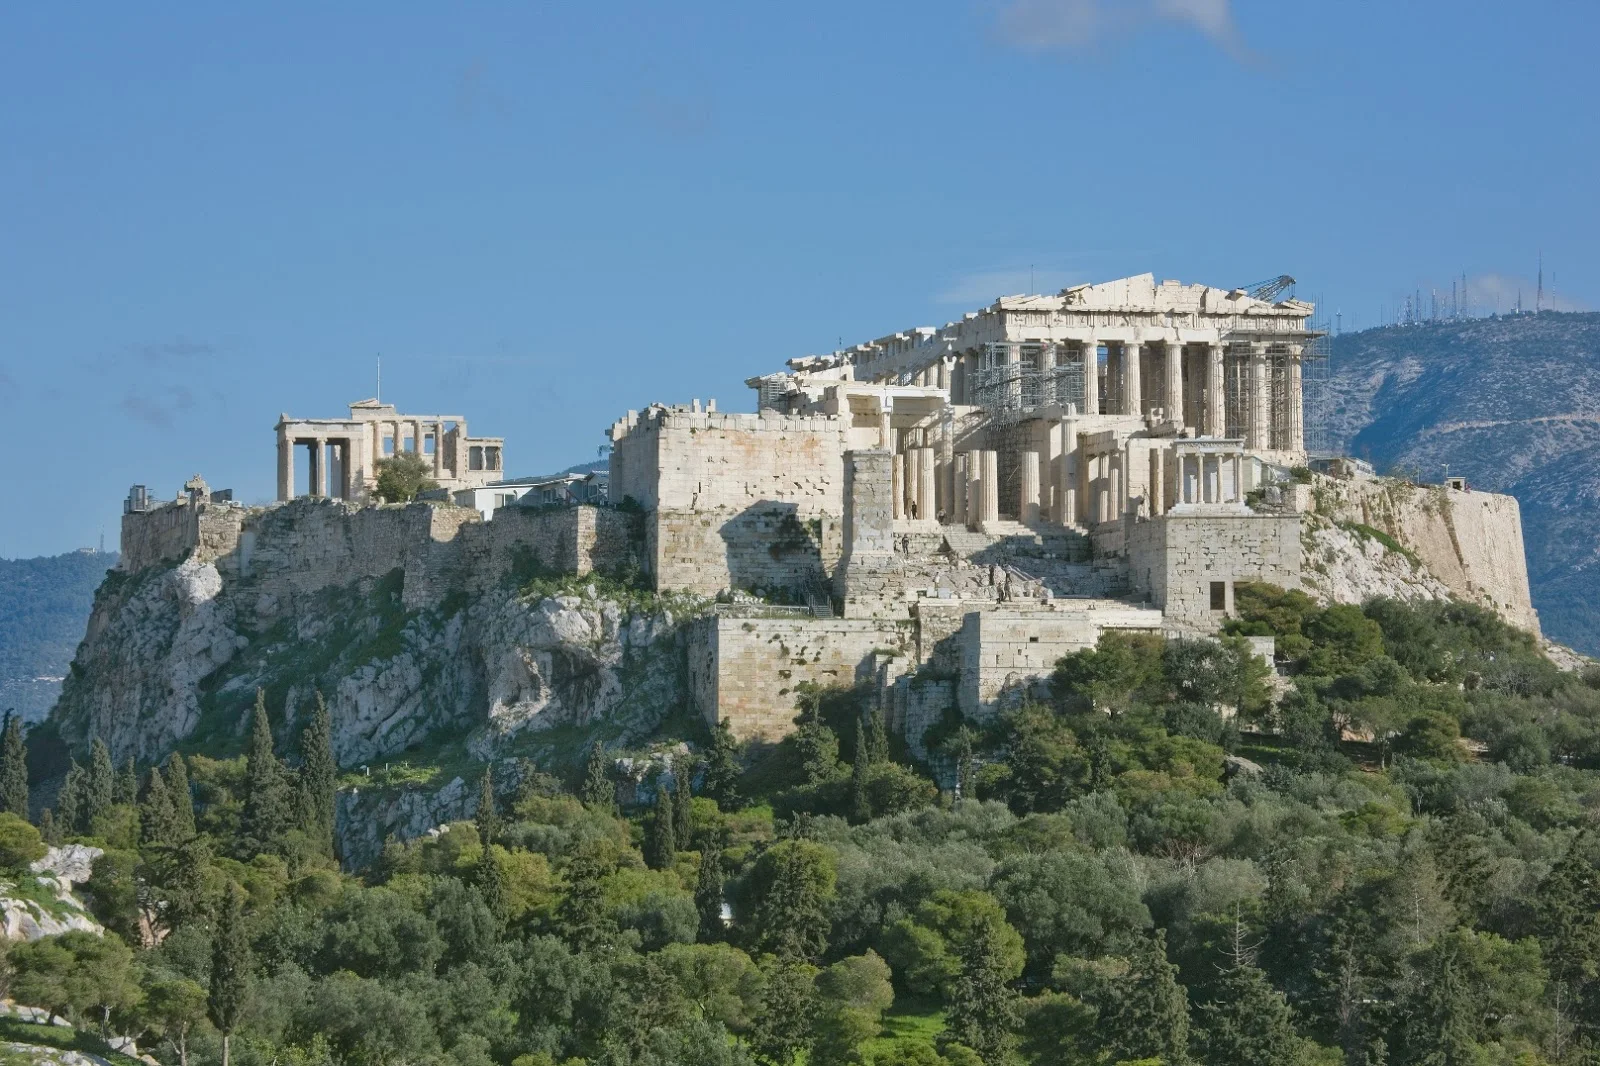 Heritage: Restoration of Athenian Acropolis monuments national priority for Greece: official